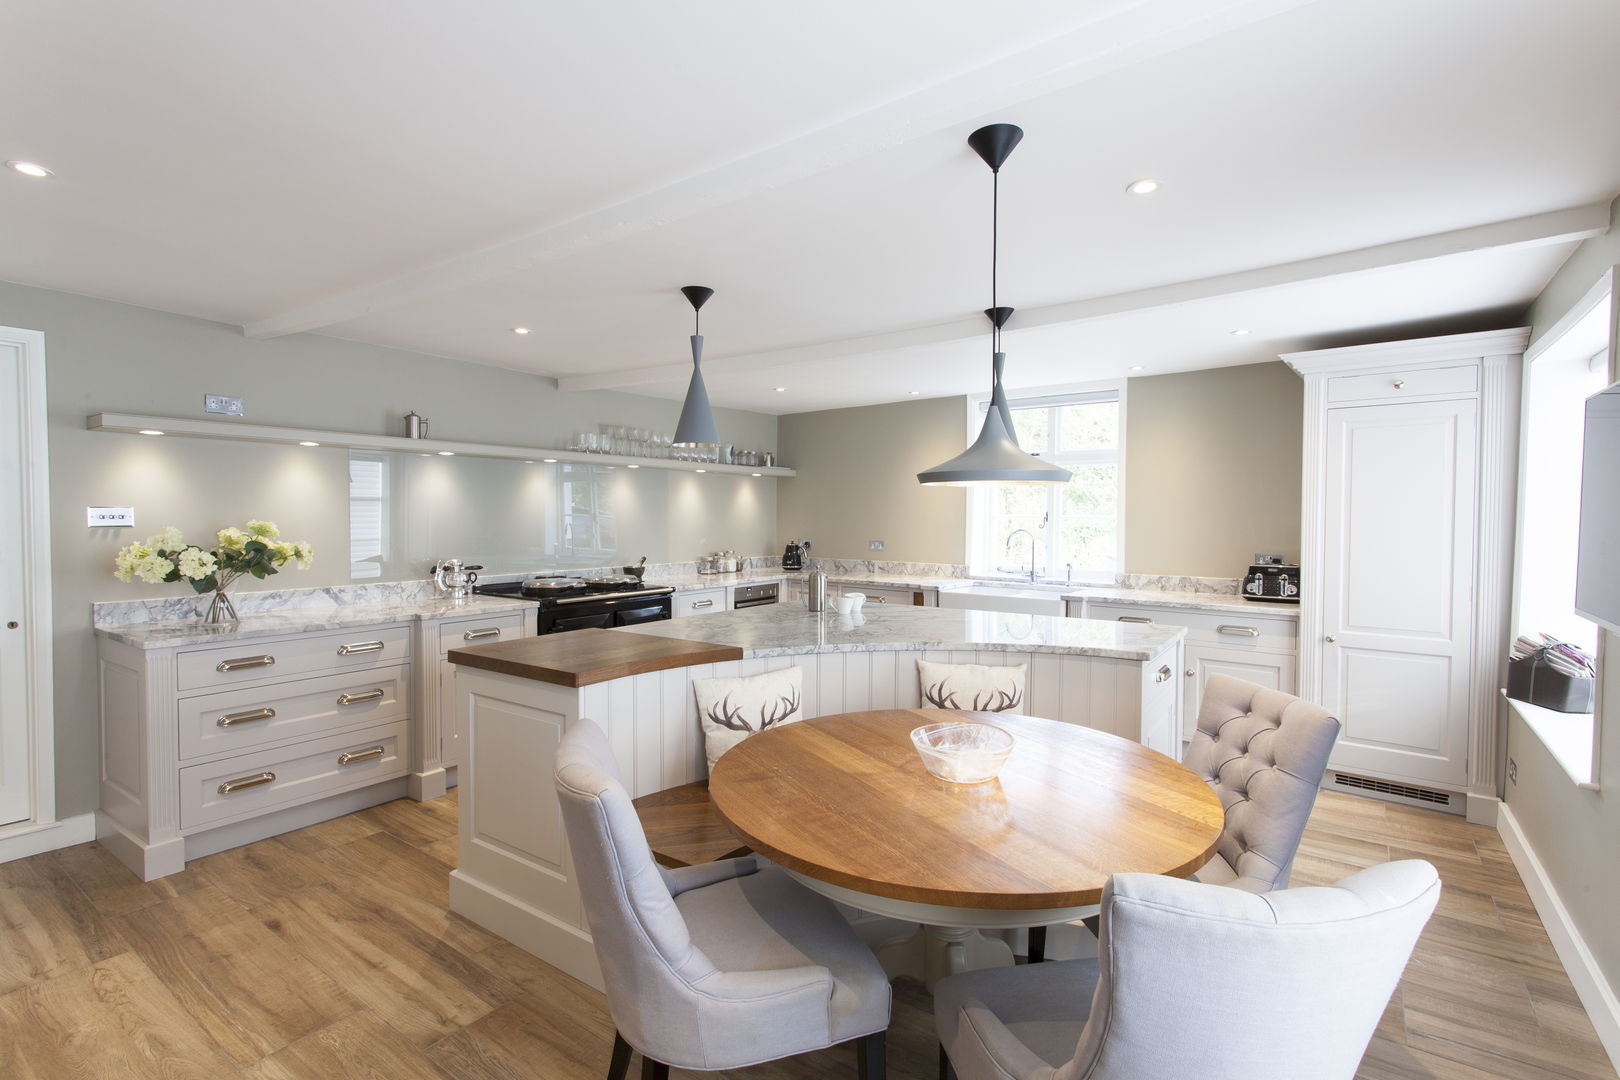 Pentlow Grand - Bespoke kitchen project in Suffok Baker & Baker Classic style kitchen kitchen seating,lighting,bench seating,kitchen table,handmade kitchen